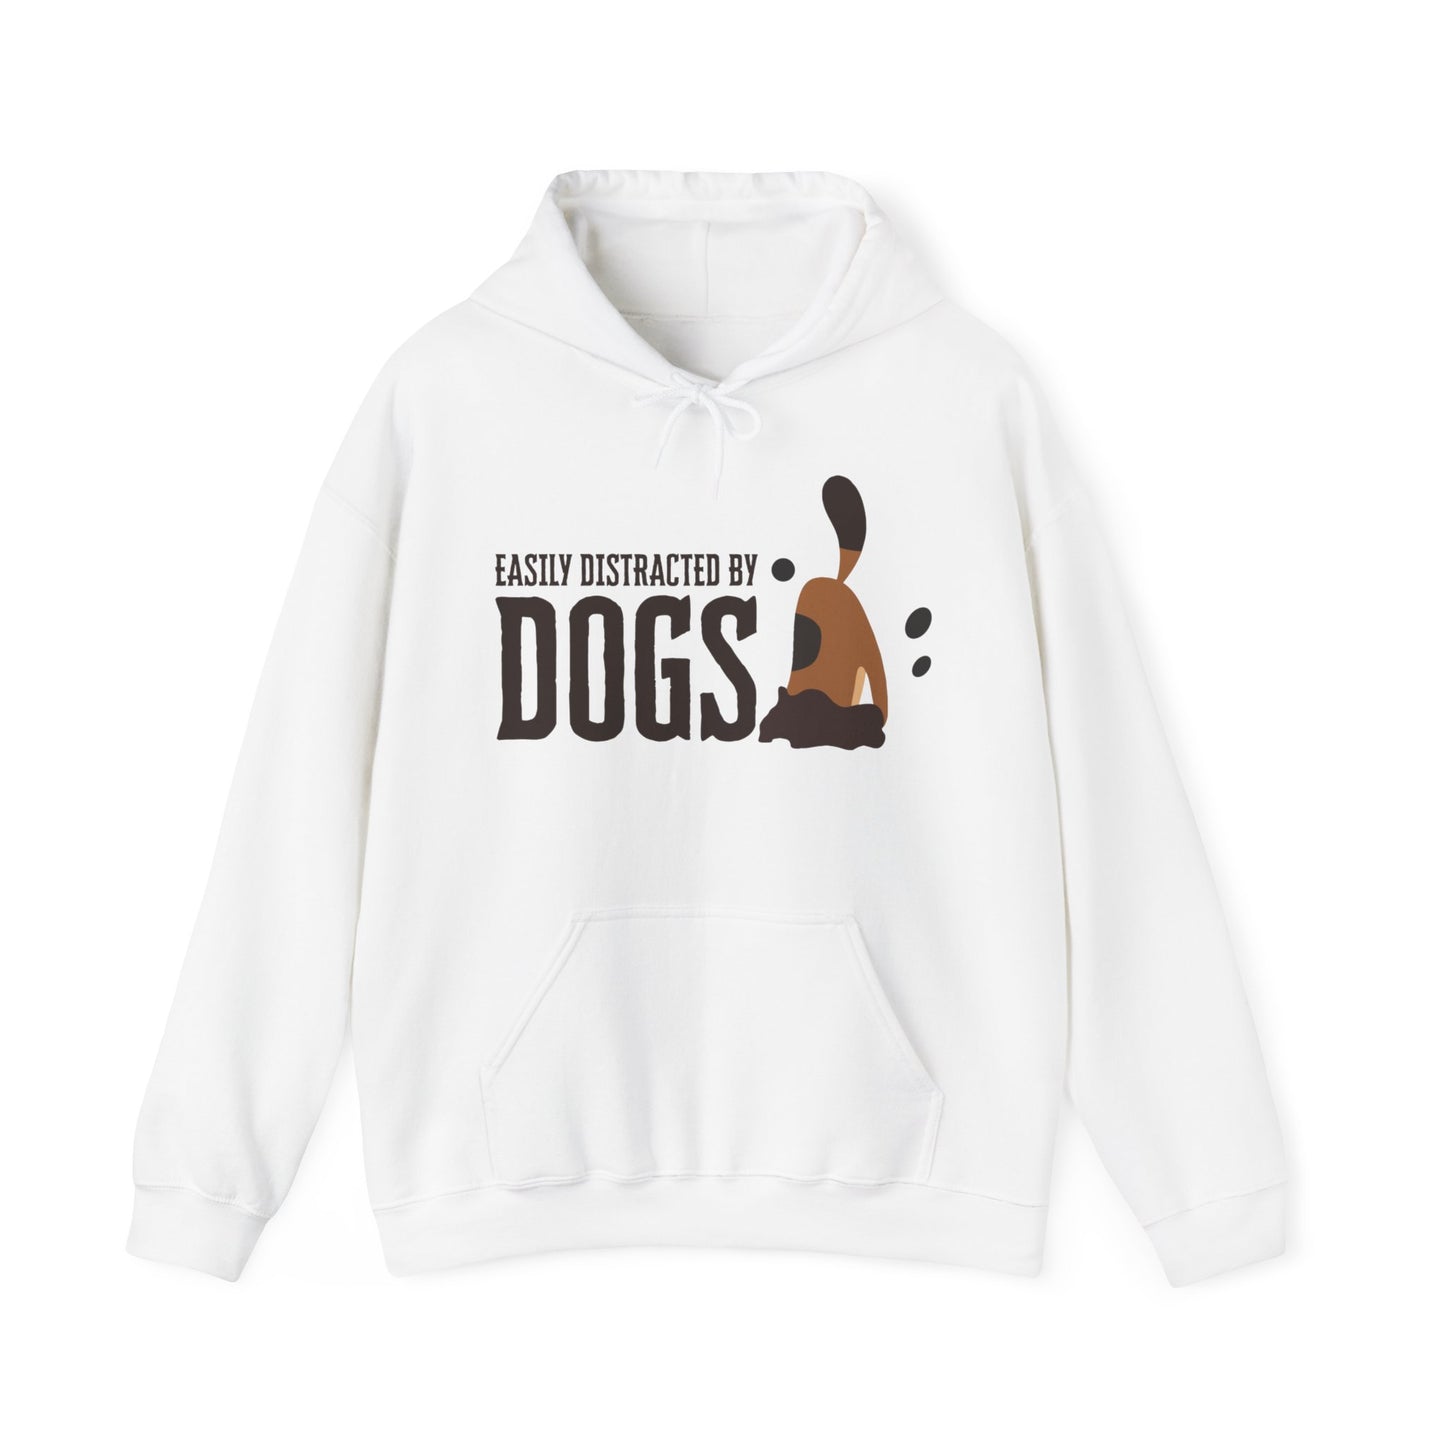 Against a white background, a ‘Dogs Pure Love, Dog Dig’ unisex white hooded sweatshirt highlights the slogan ‘Easily Distracted by Dogs,’ and a graphic of a dog digging.